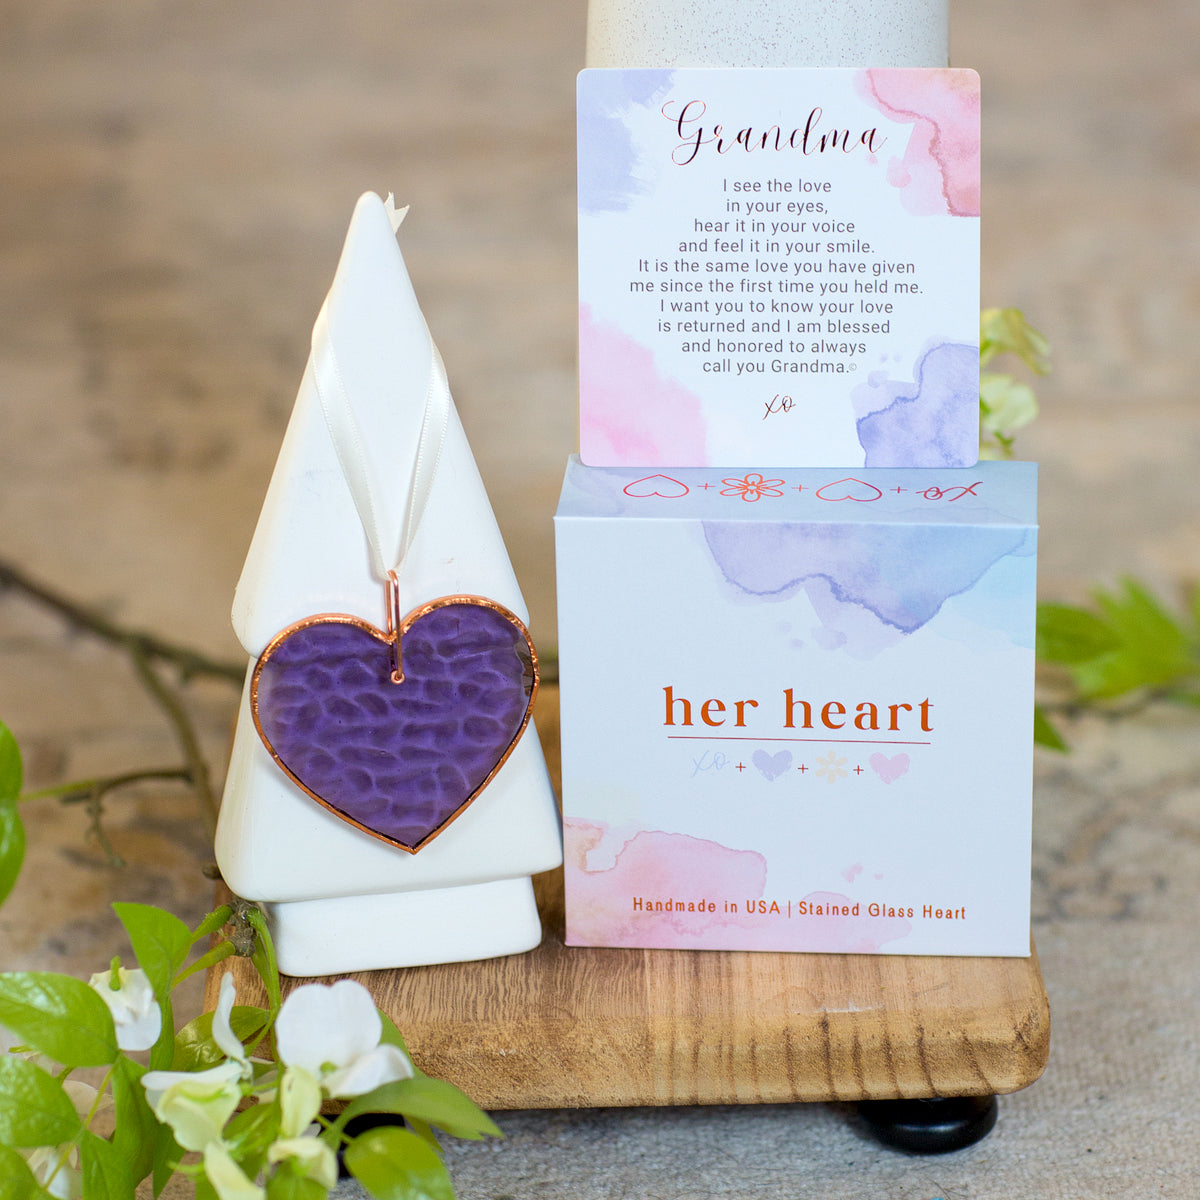 Her Heart for Grandma gift with box, sentiment card, and purple stain glass heart.